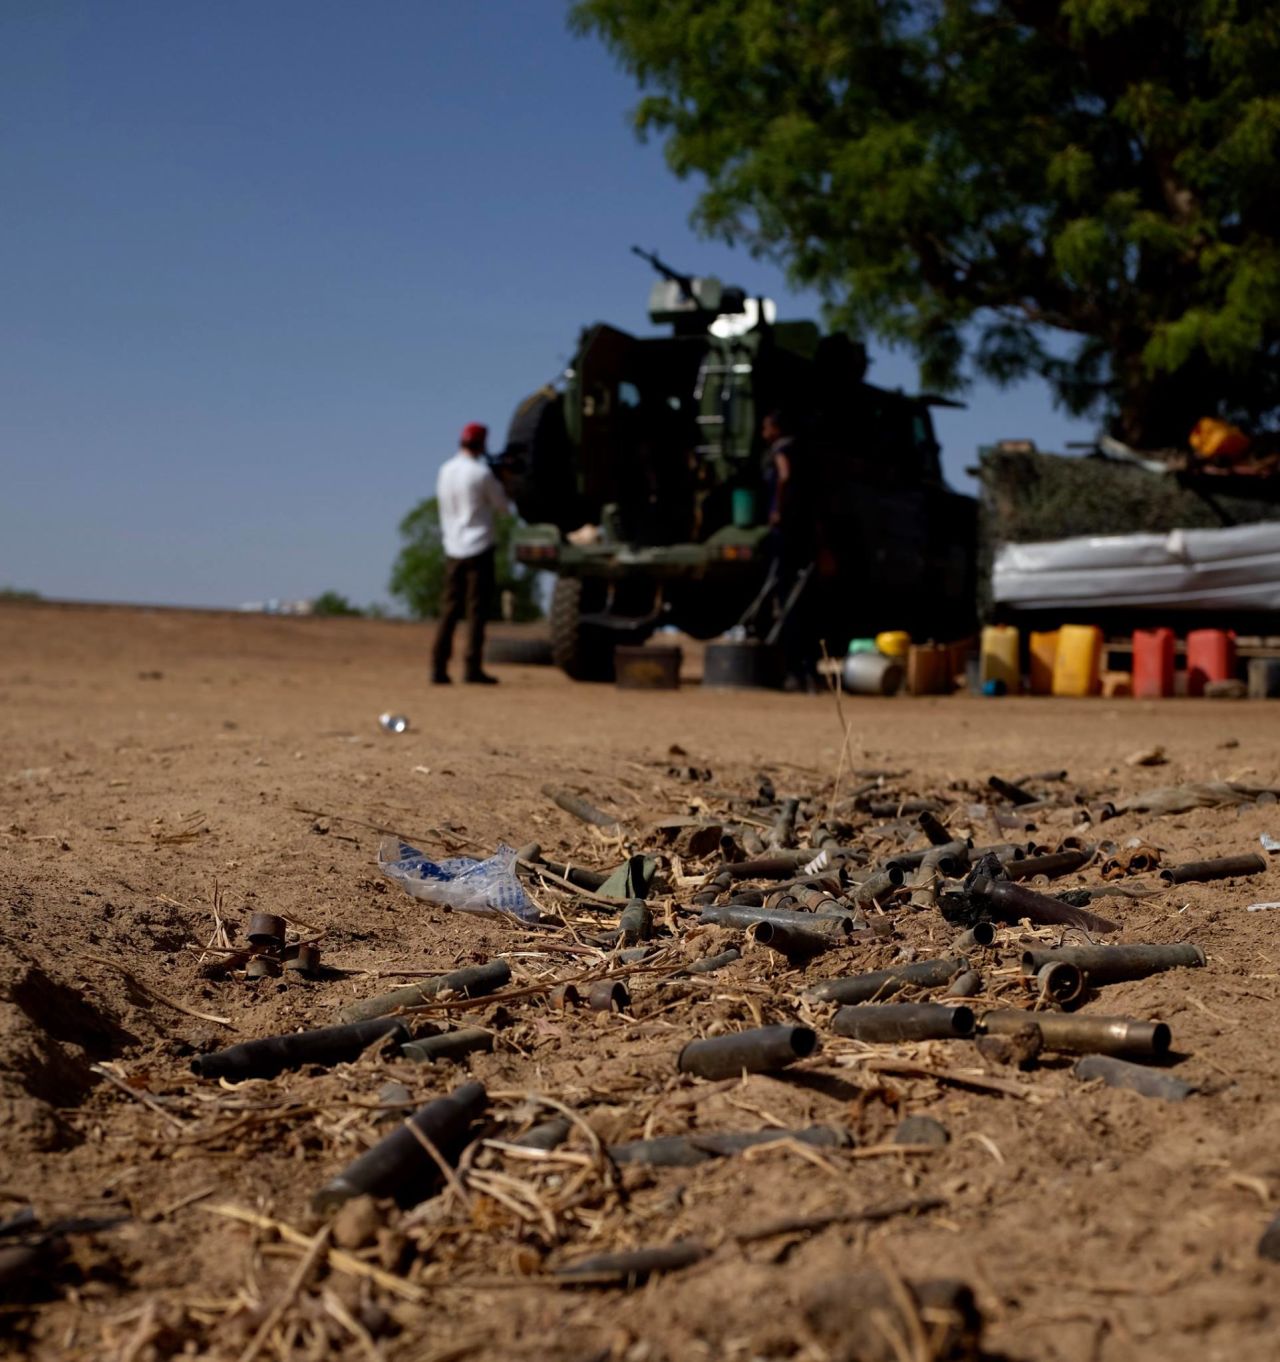 Empty ammunition cases litter the ground, untouched since they flew from the machine guns used in a skirmish between the Nigerian army and Boko Haram fighters. 